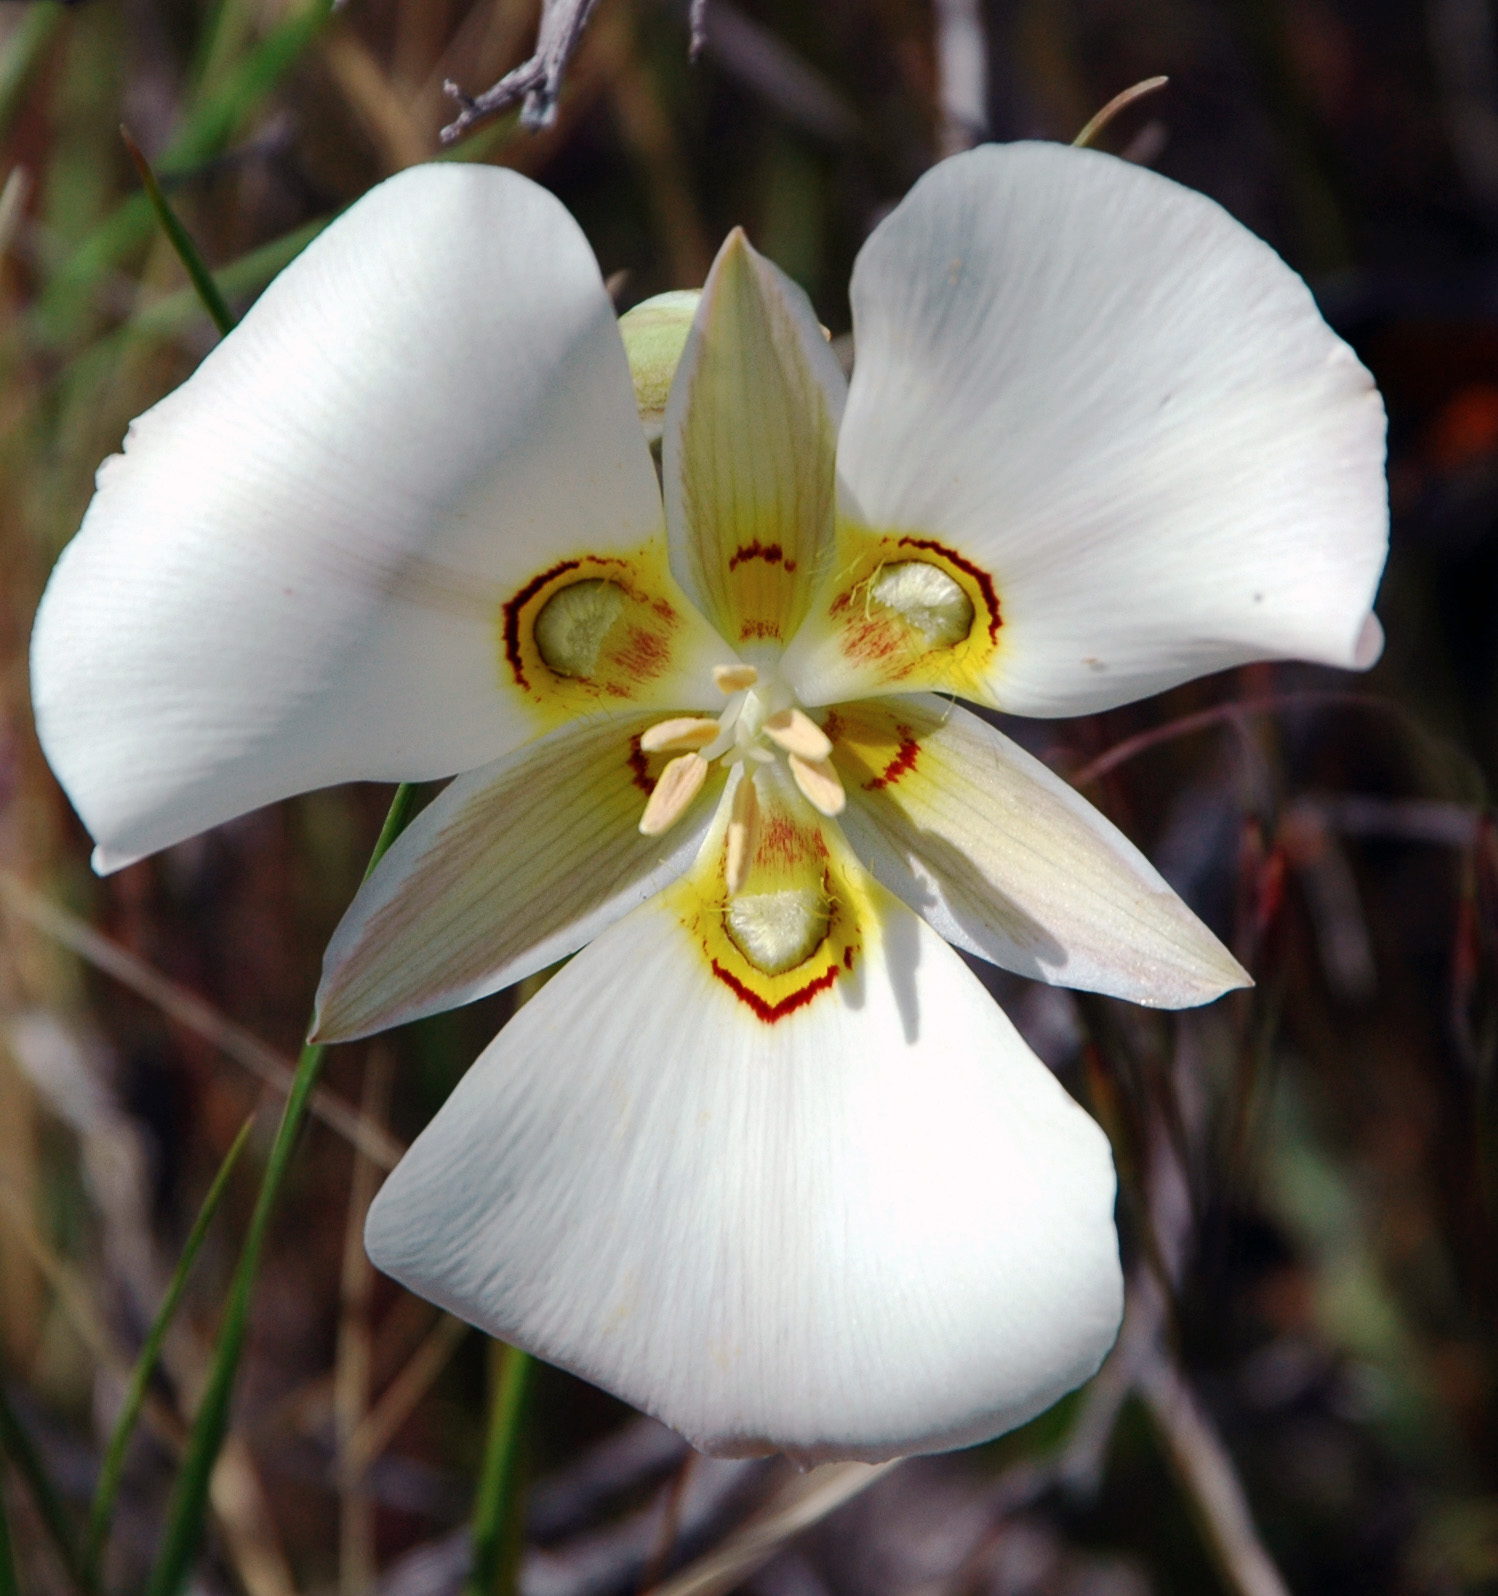 File:Sego lily cm.jpg - Wikimedia Commons